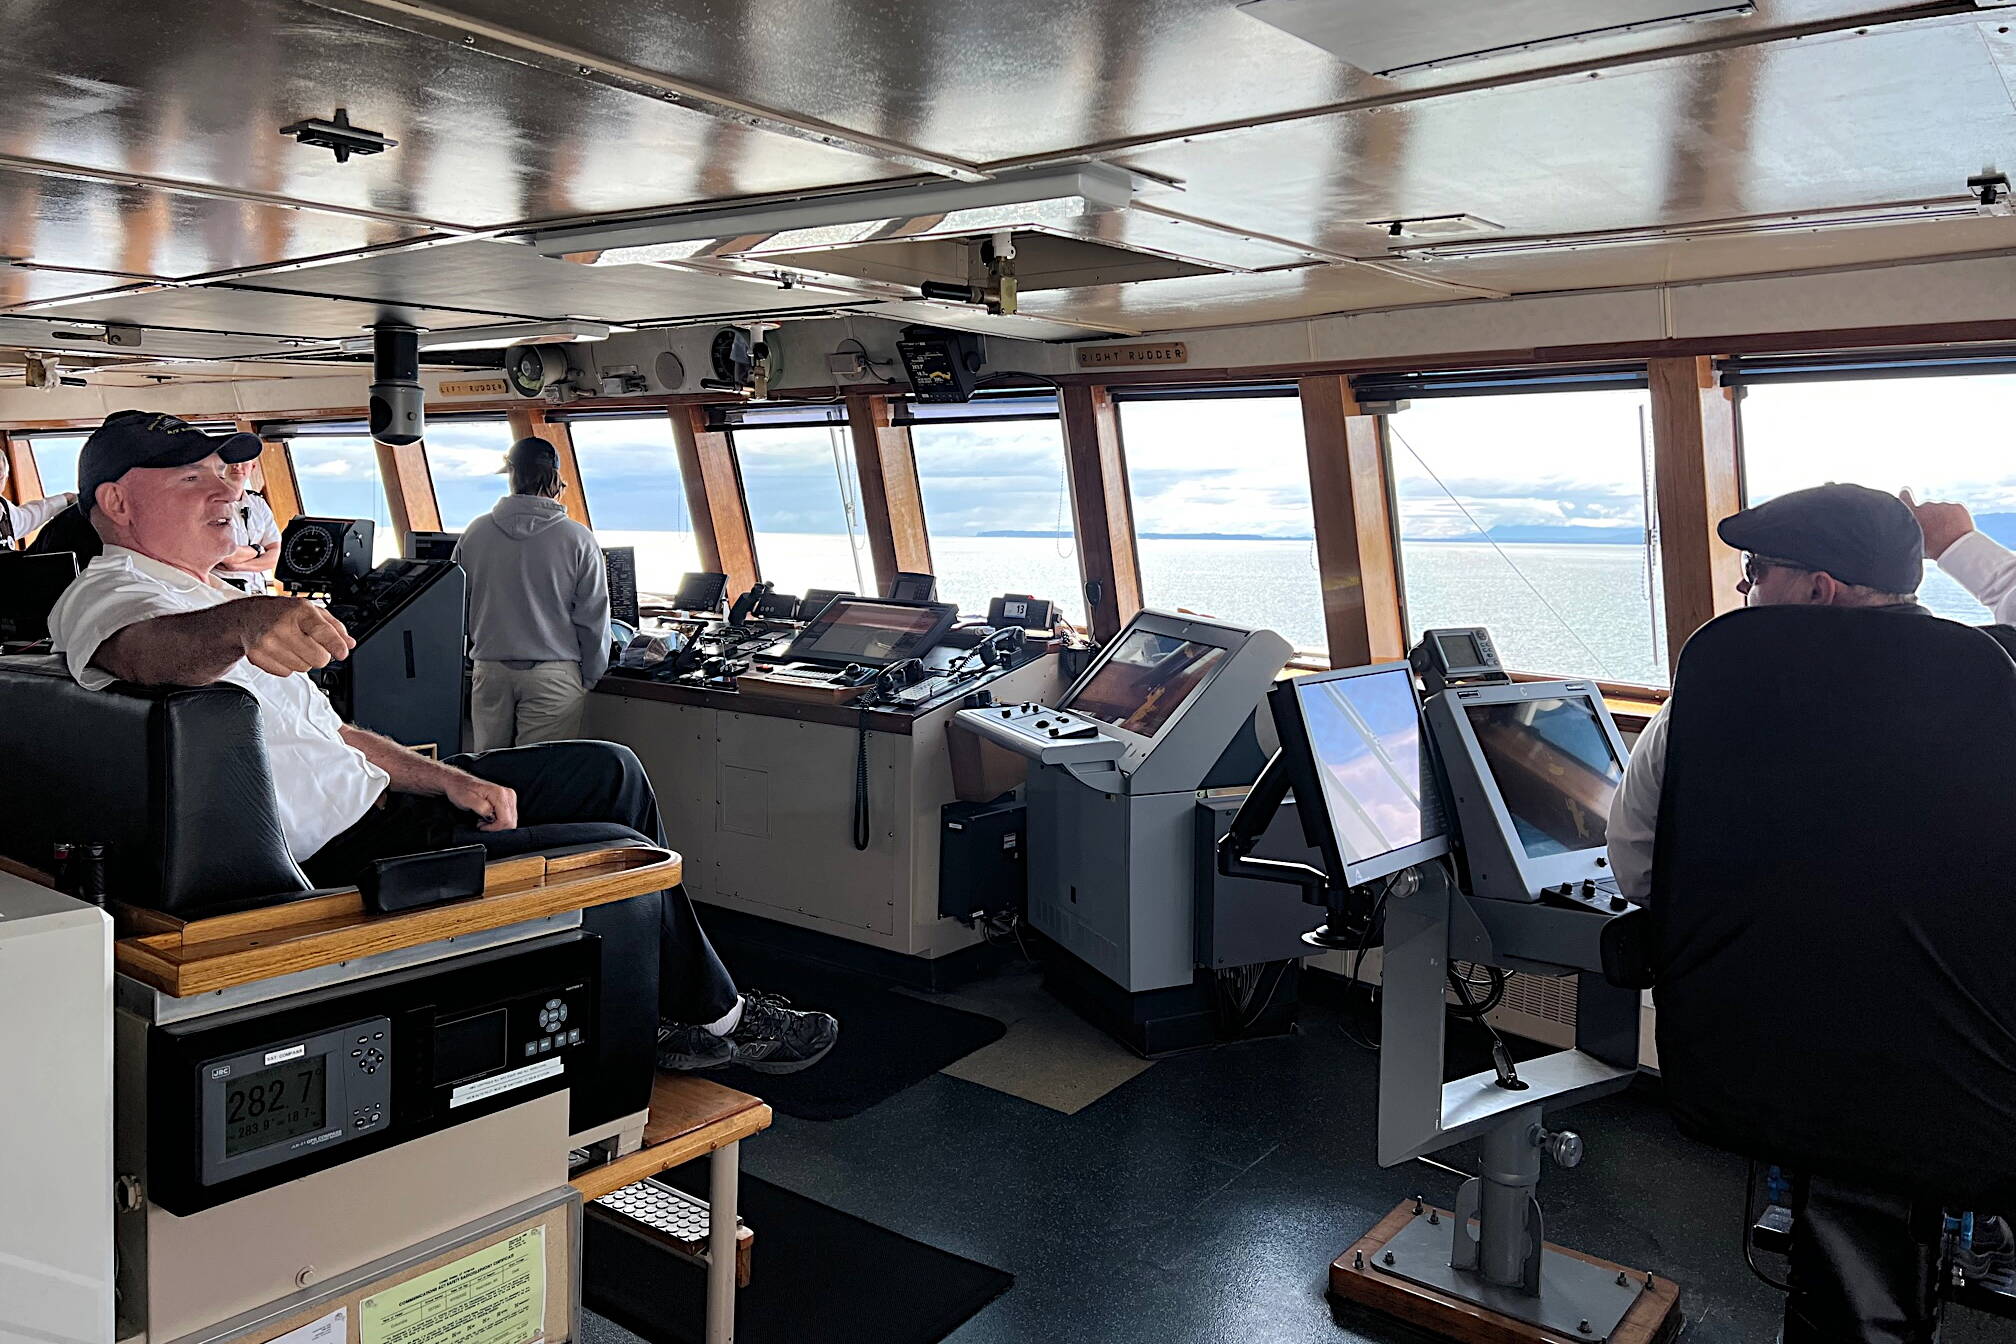 Capt. Dave Turner and Chief Mate Lucas Bevegni on the bridge of Columbia state ferry as Bevegni takes note of a whale spout more than a mile in the distance. (Meredith Jordan / Juneau Empire)